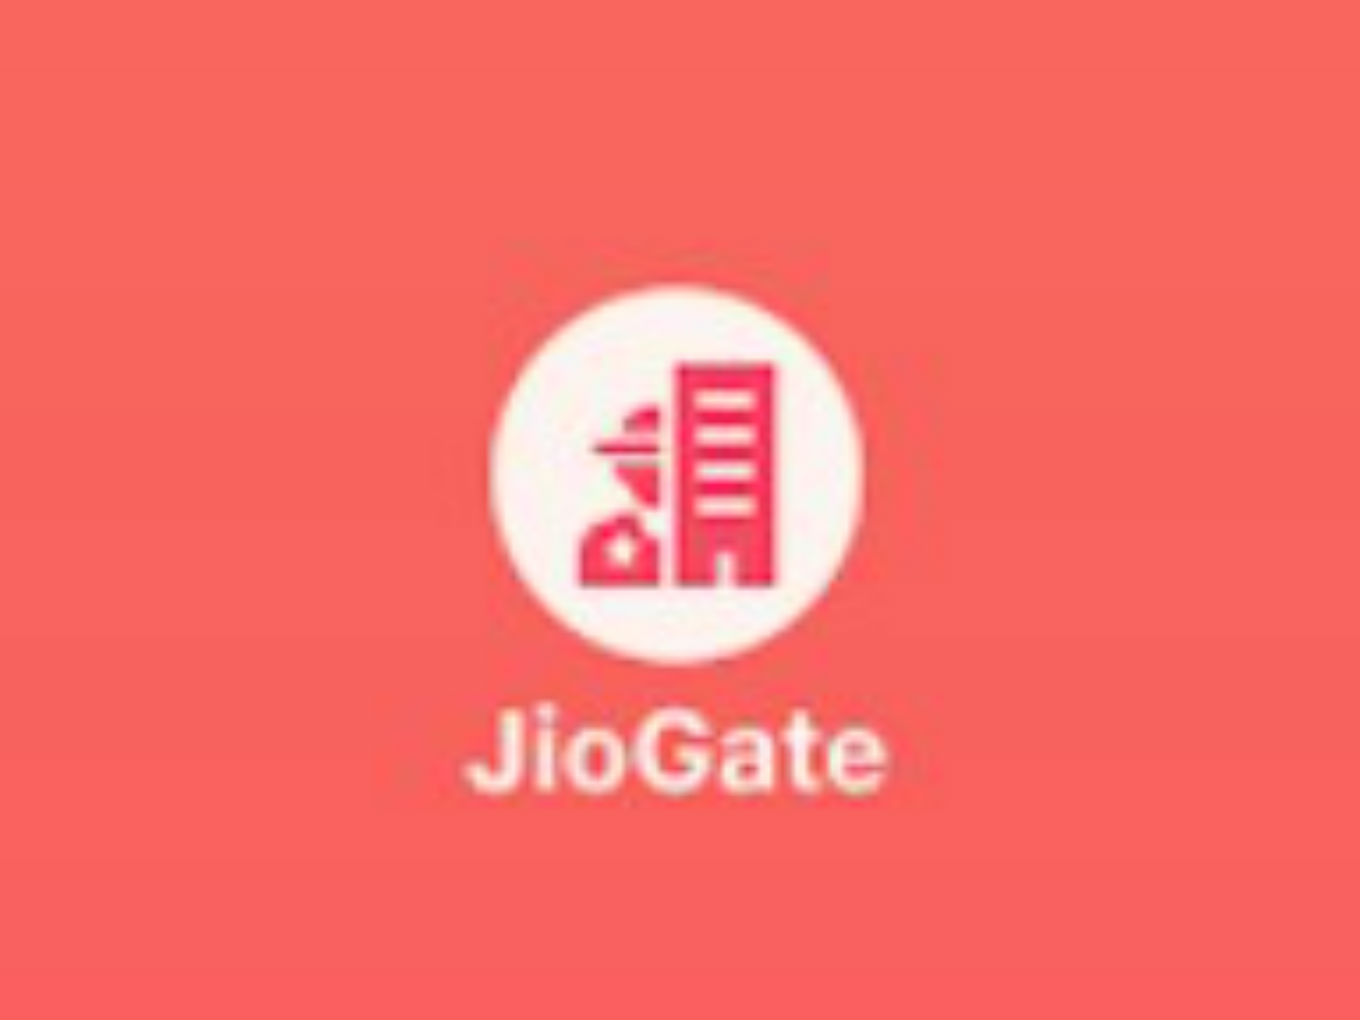 startup news - Reliance Launches JioGate In Security Management Space